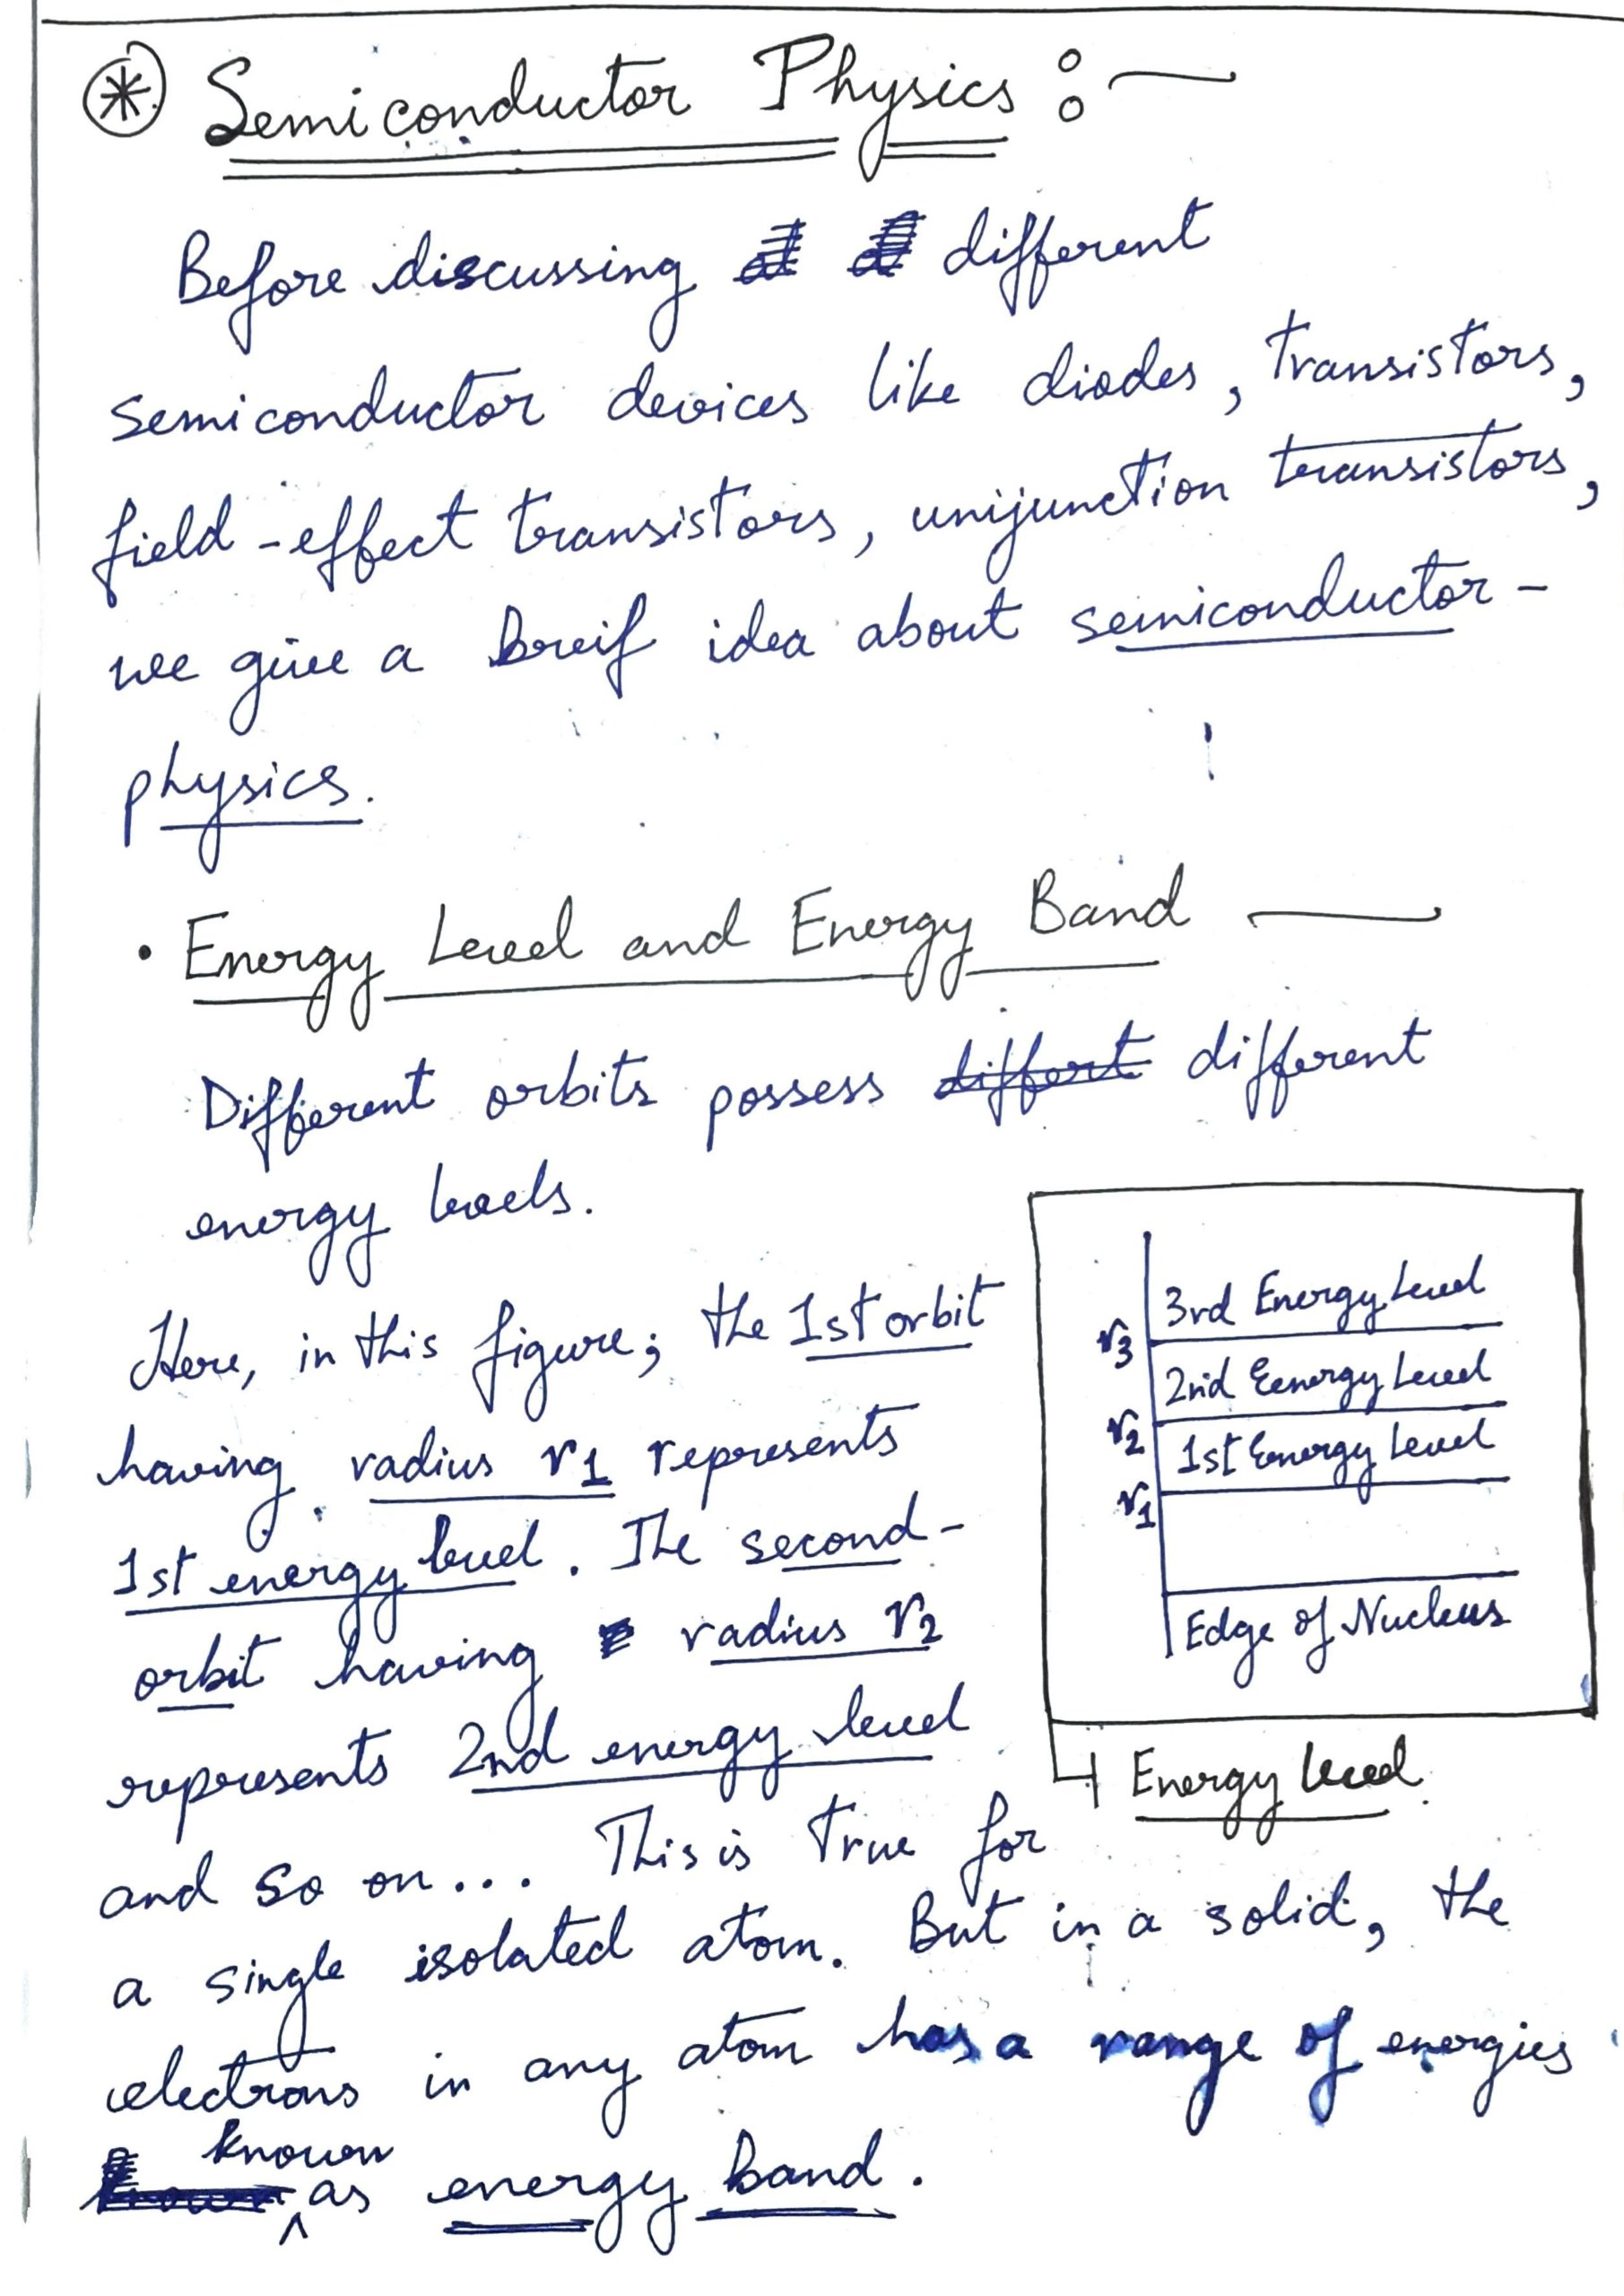 Physics Notes: Semiconductor and Diodes Handwritten Notes